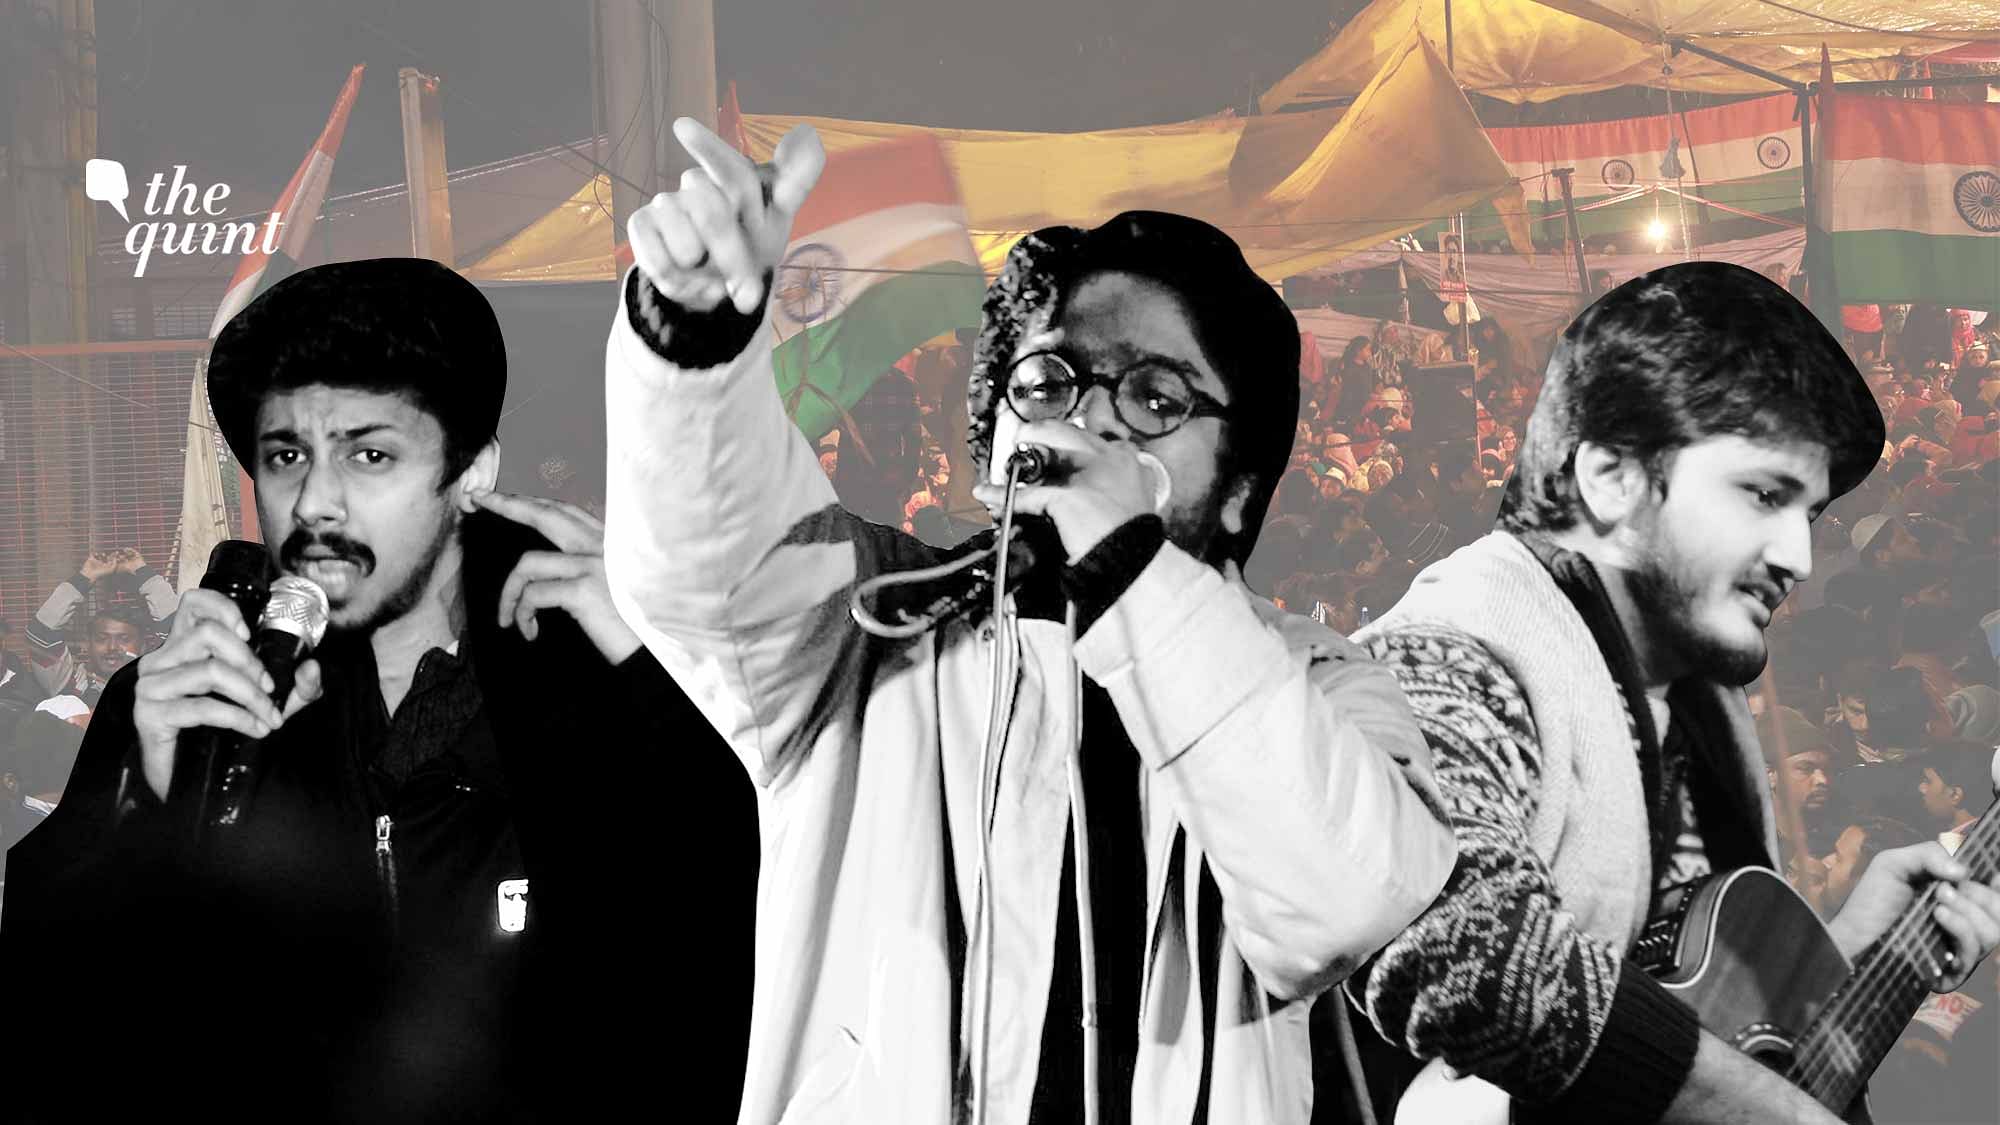 Armaan Yadav, Sumit Roy &amp; Poojan Sahil perform at protests and several other platforms to spread their message through music.